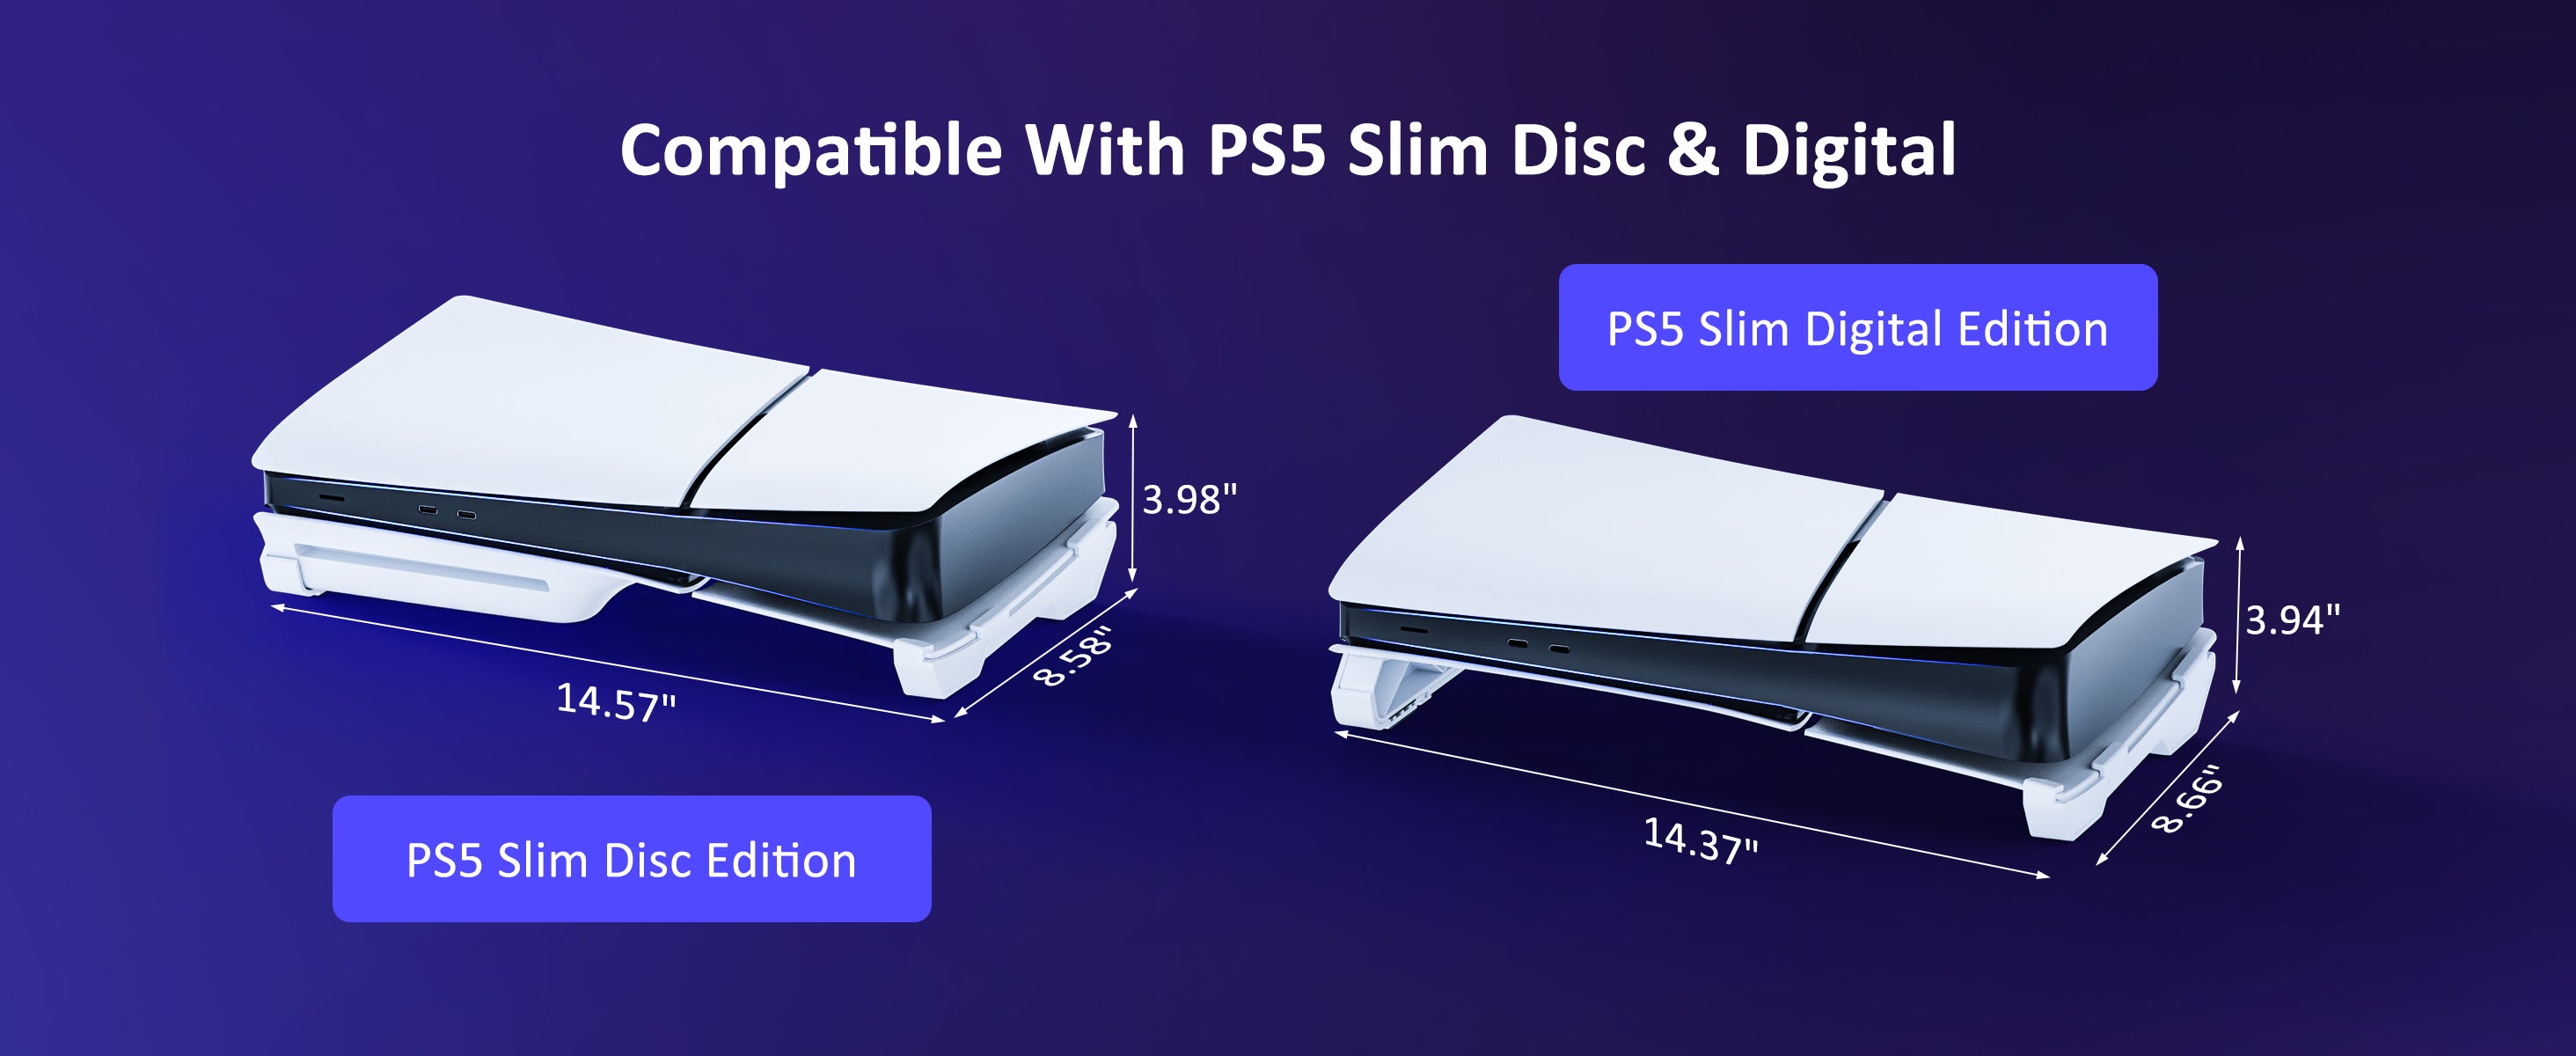 This stand is compatible with both the PS5 Slim Digital Edition and the Disc Edition.